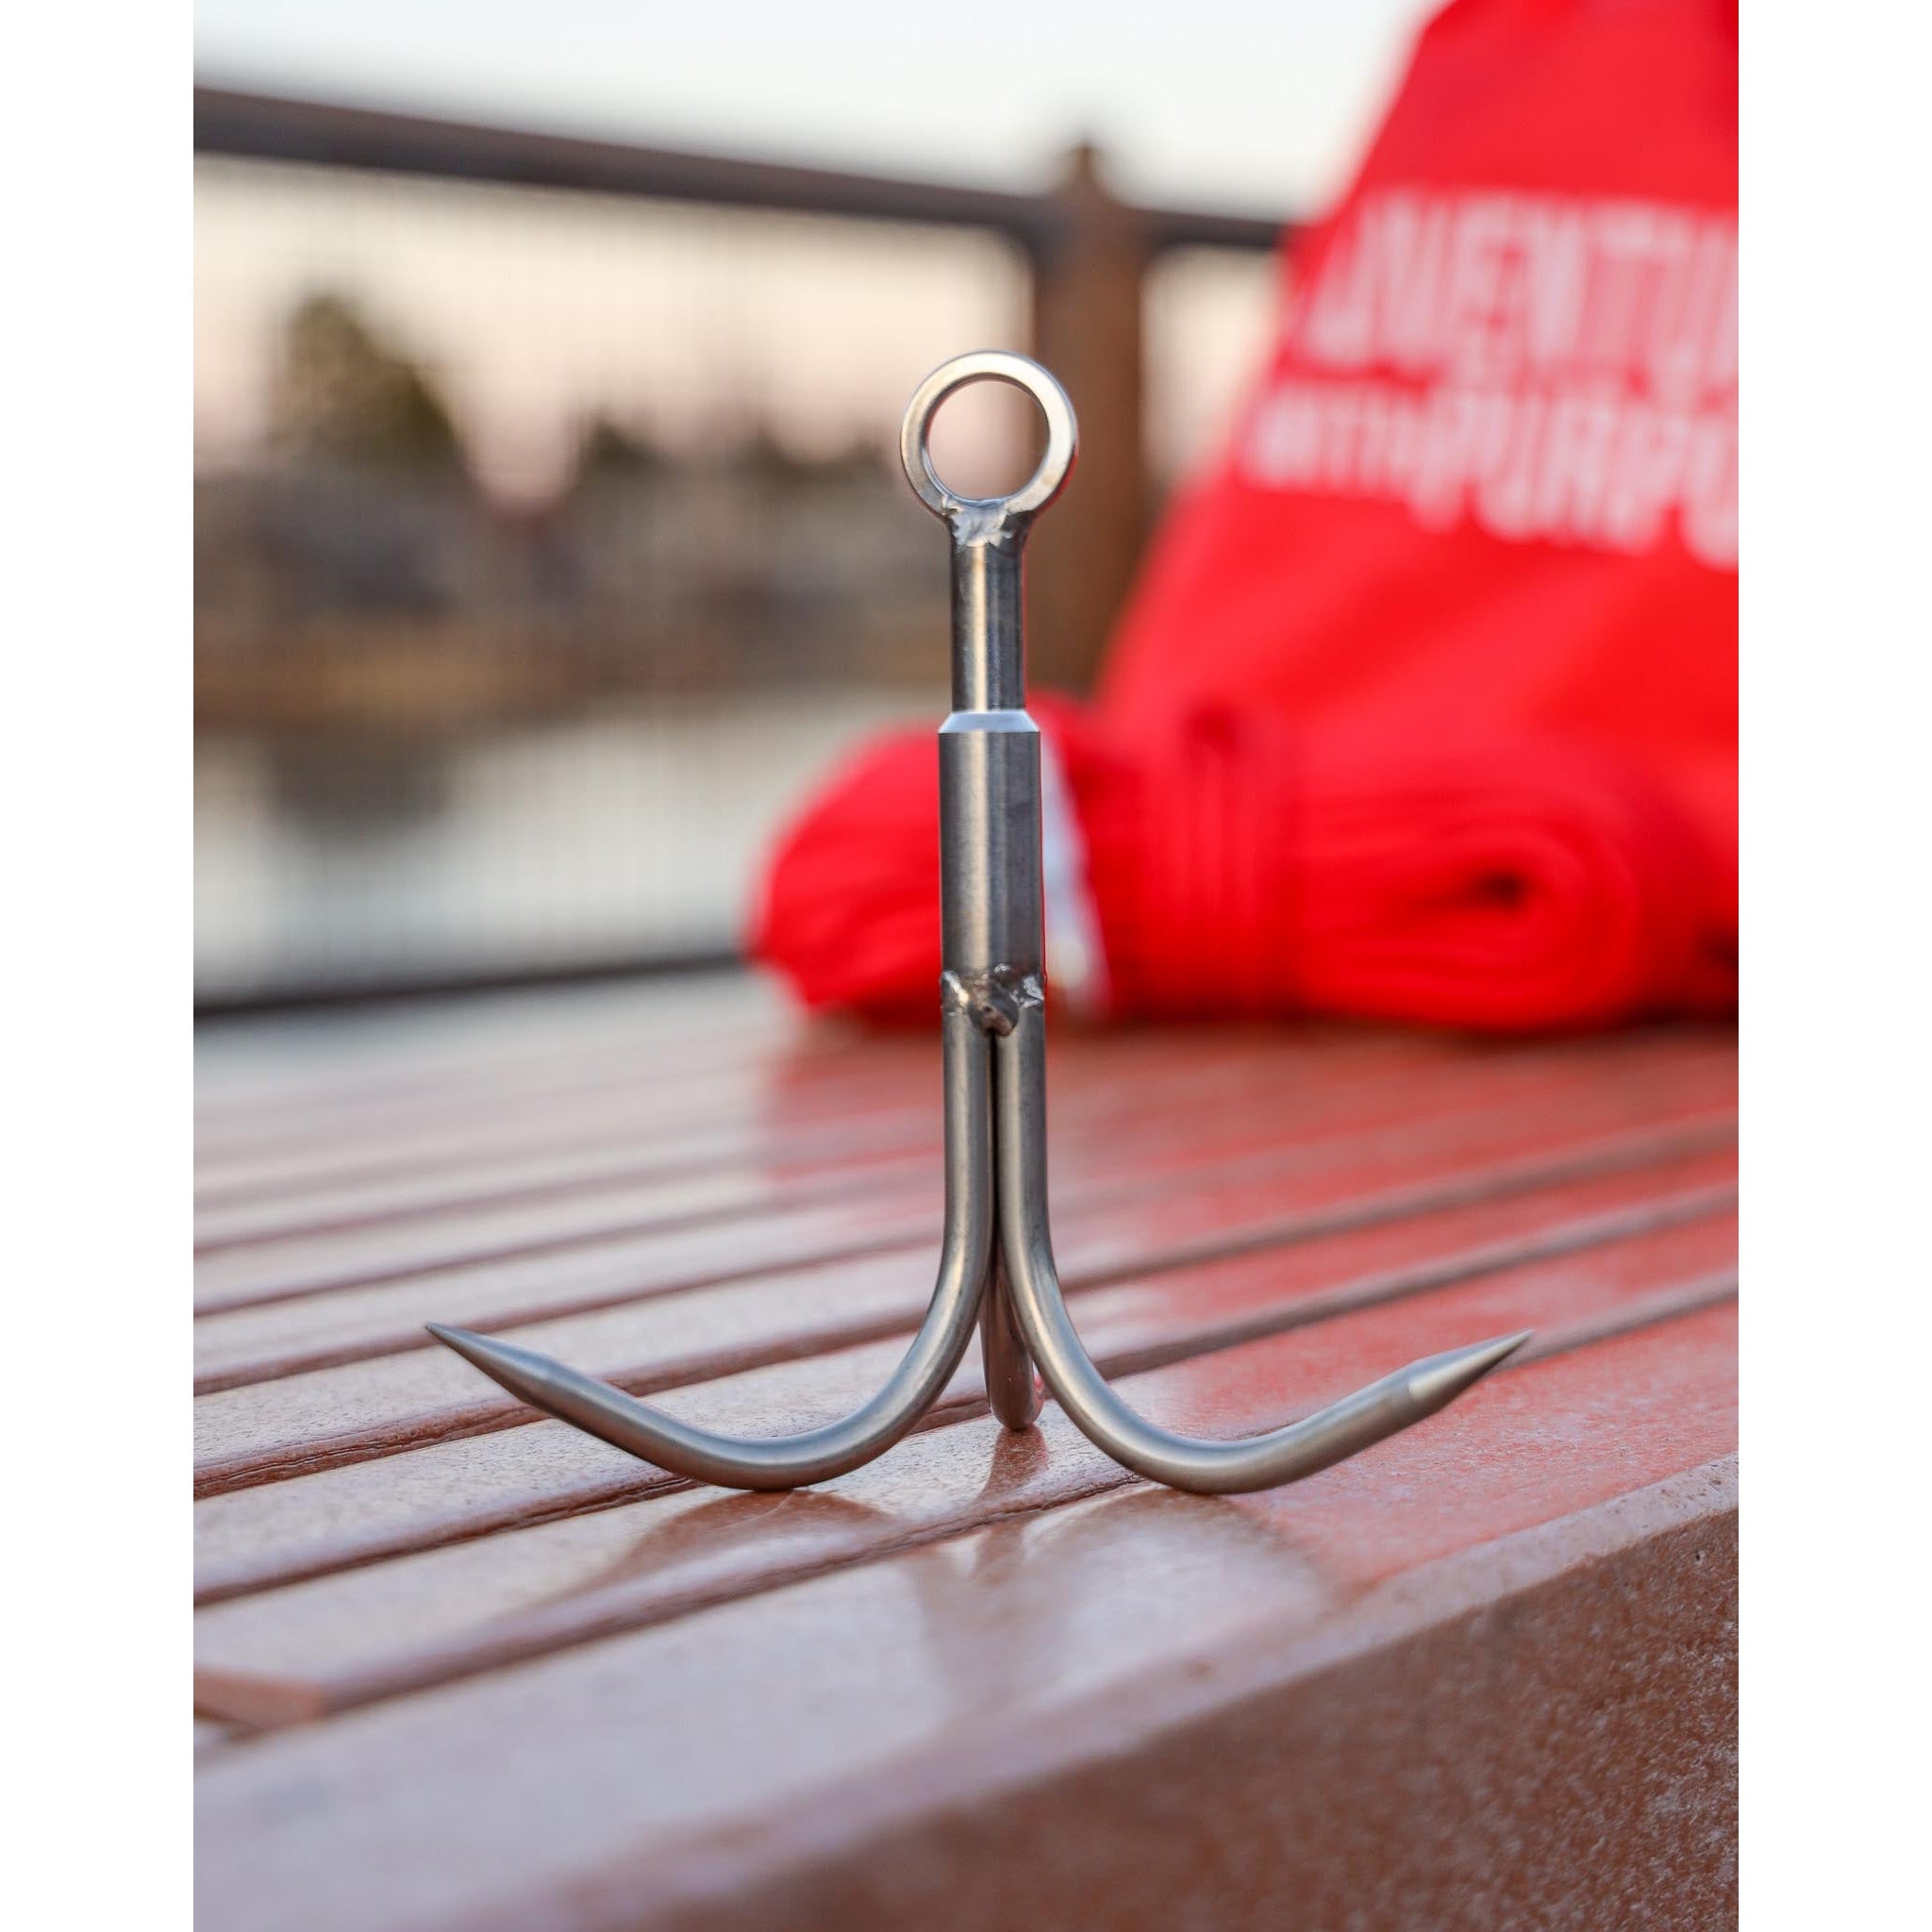 STAINLESS STEEL GRAPPLING HOOK – Adventures With Purpose